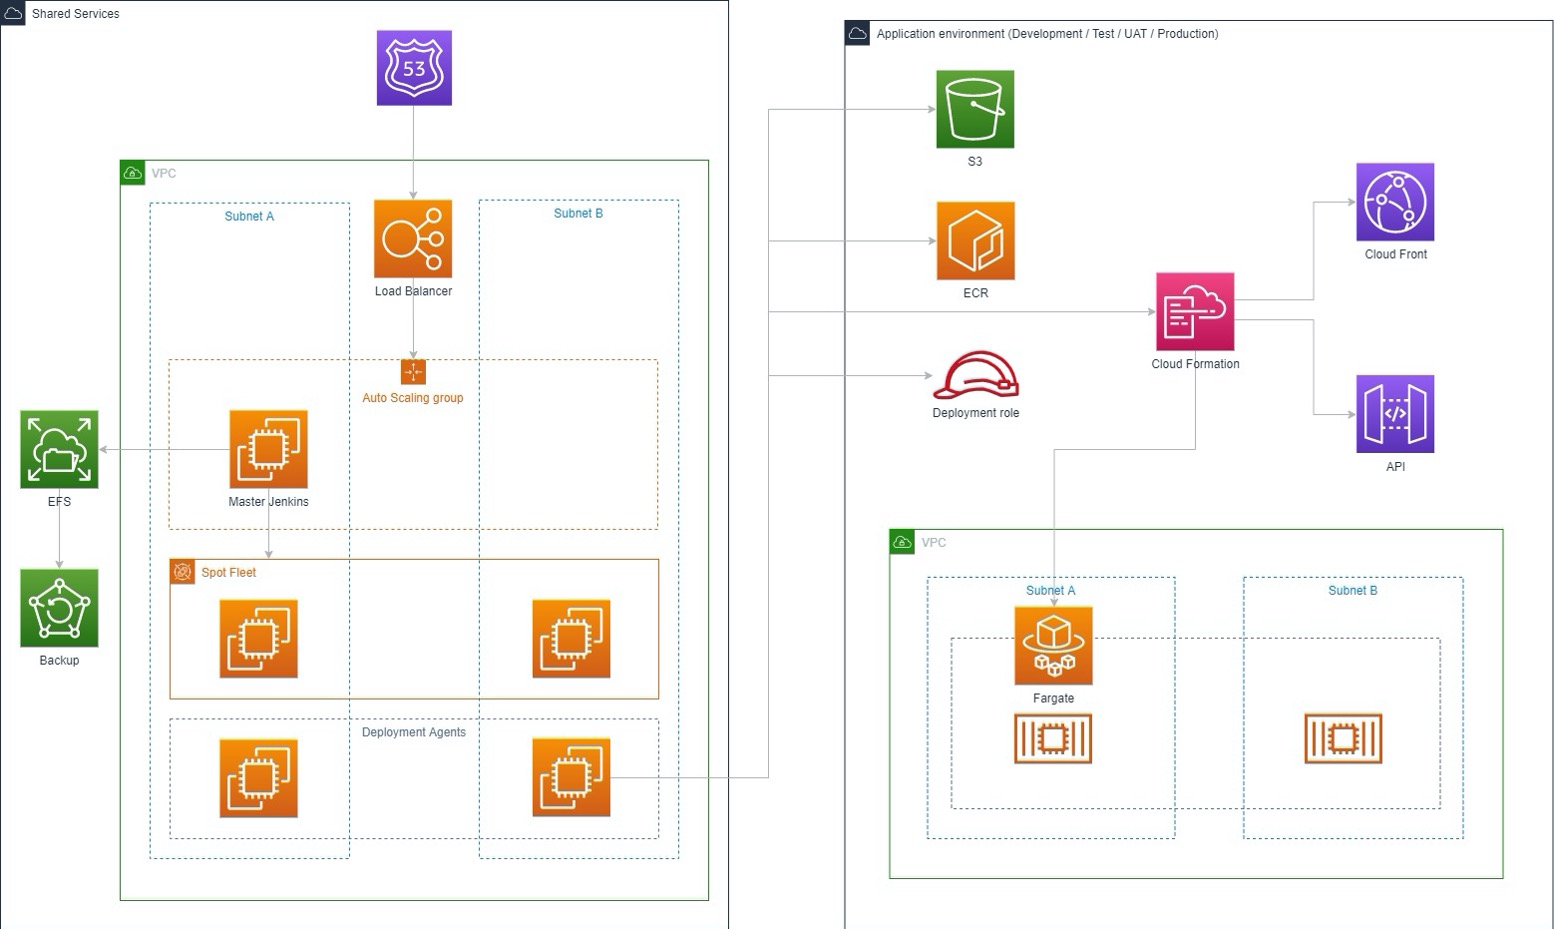 Solution overview diagram showing both Shared Services and the Application Environment in separate panels